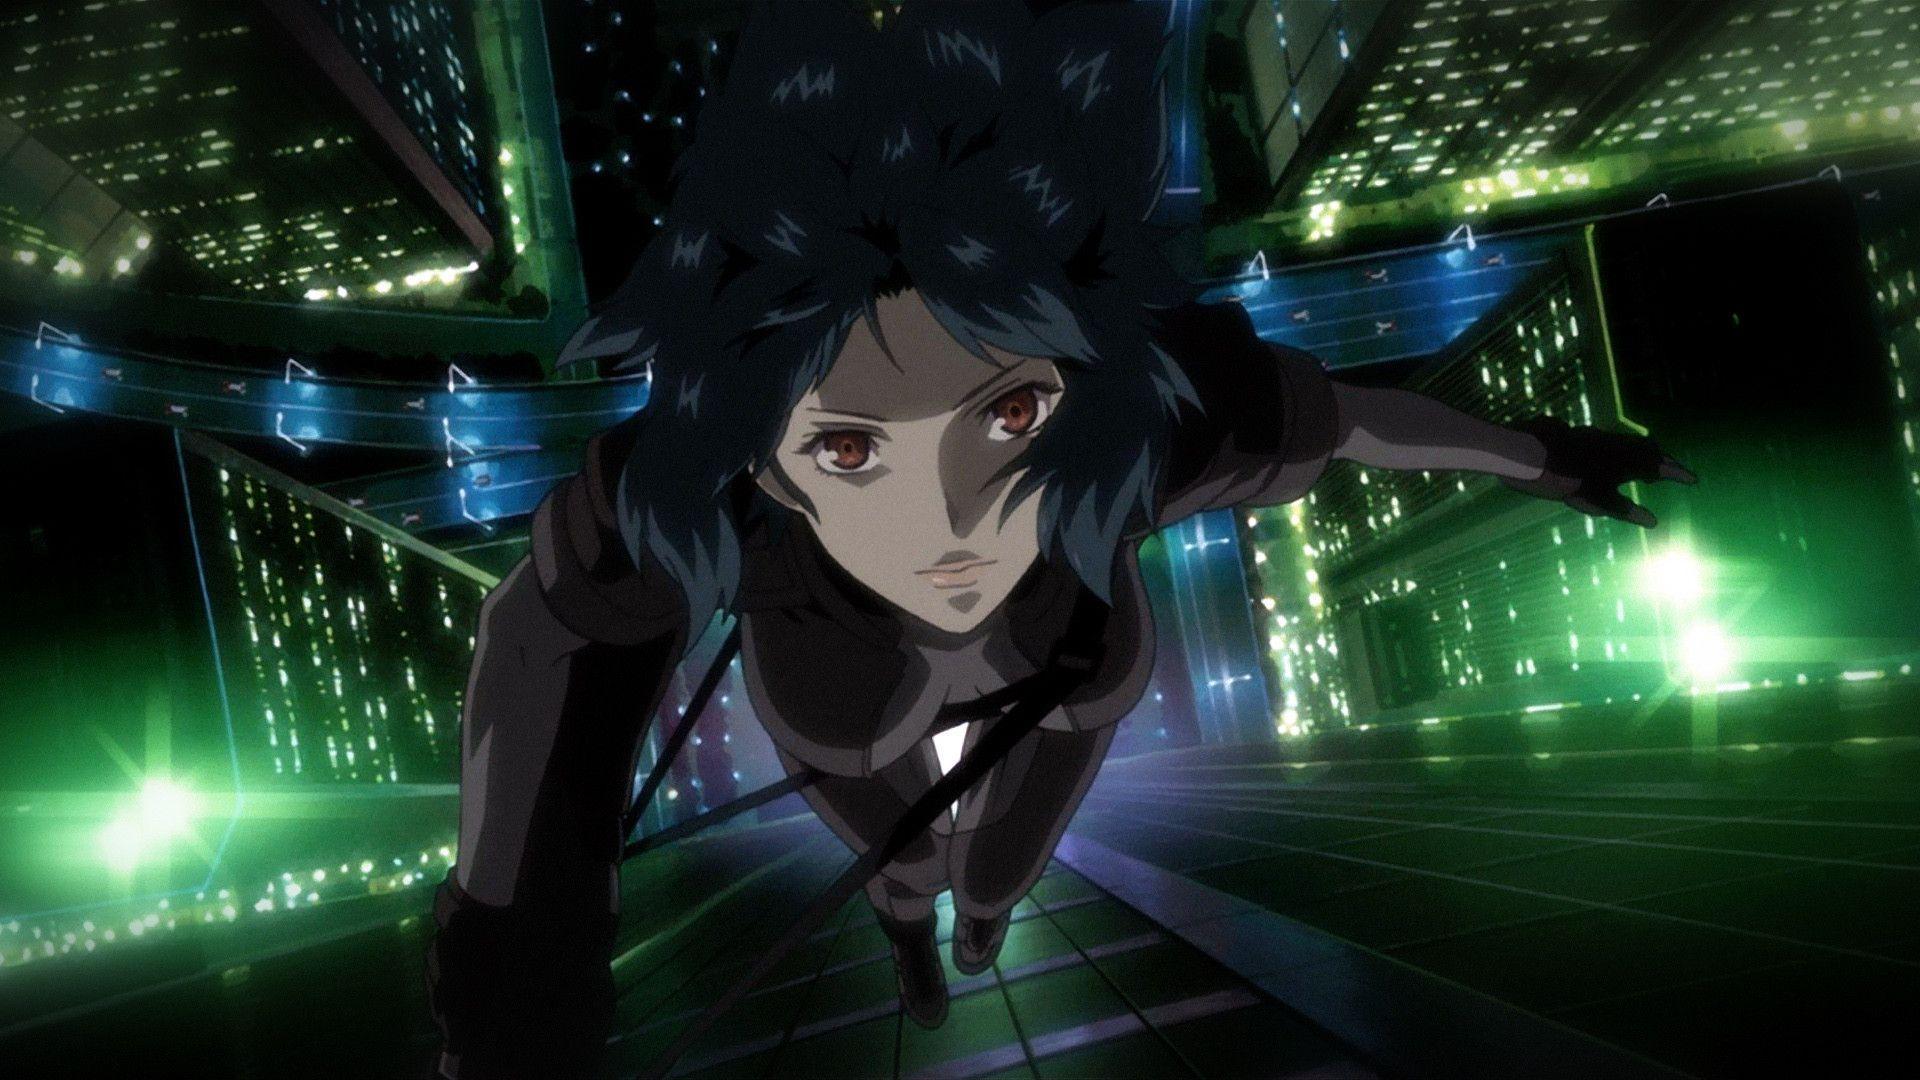 Ghost in the shell hd wallpapers hd images backgrounds